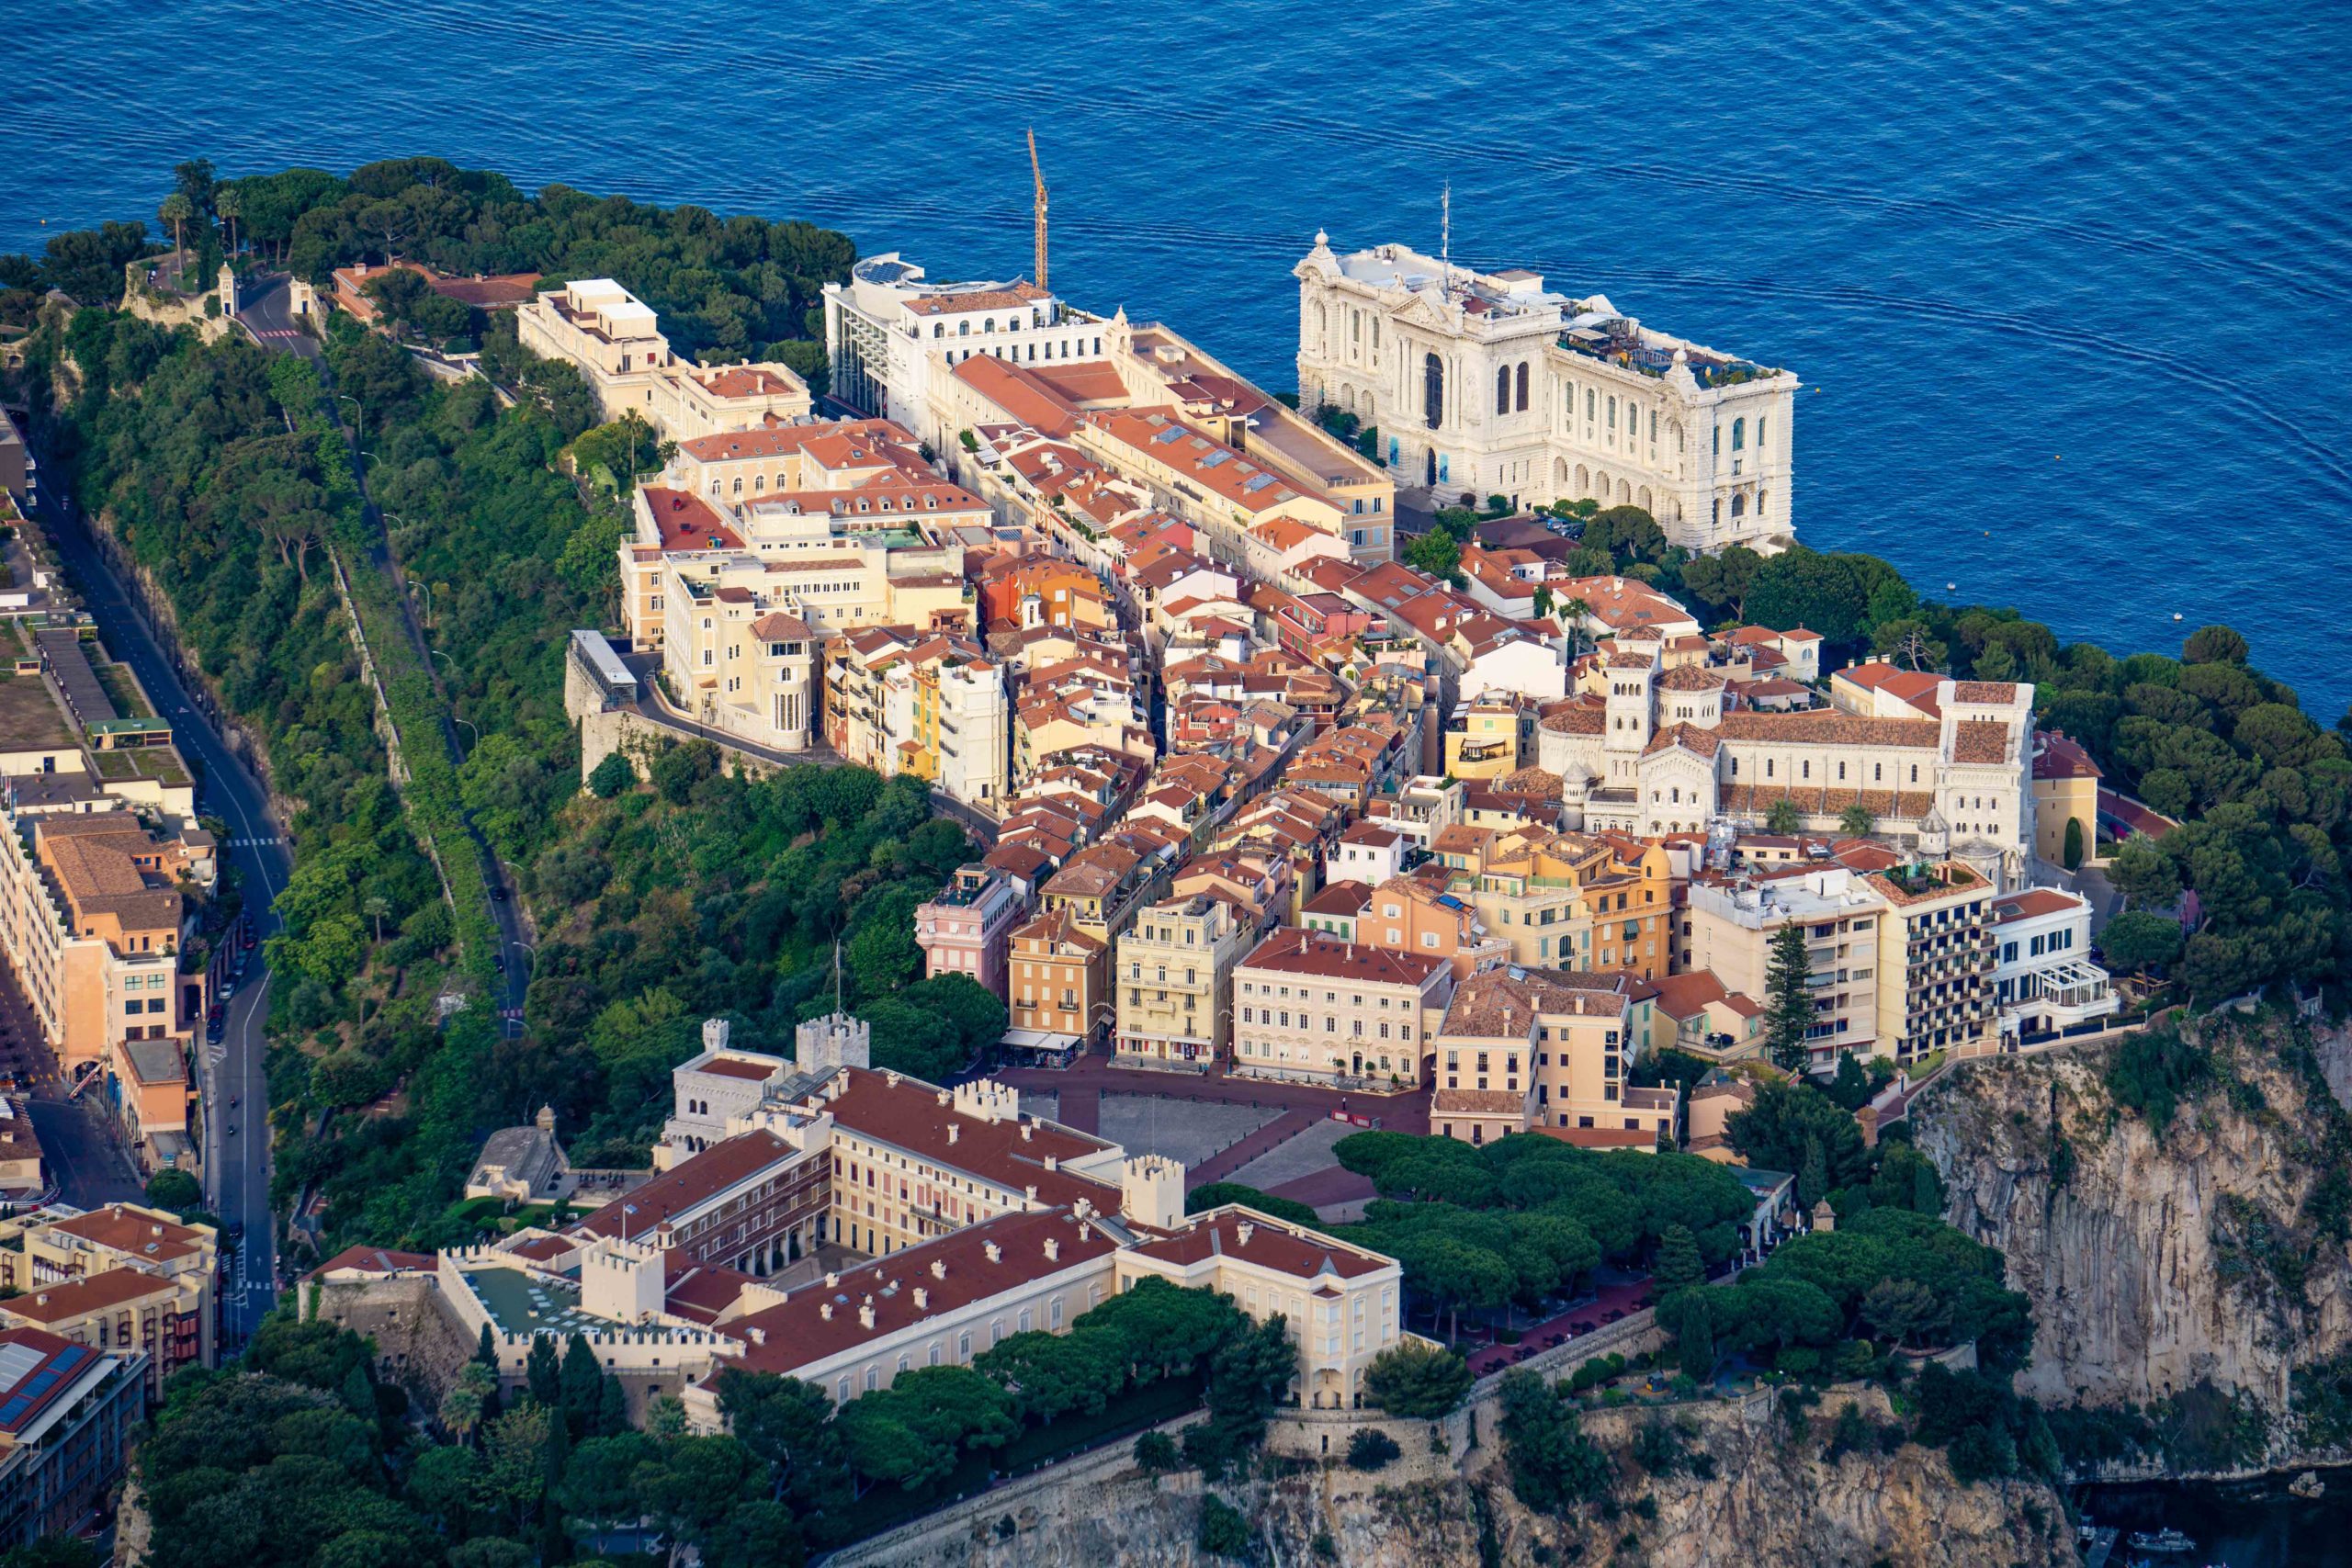 Rocher de Monaco from above © Einaz80 - licence [CC BY-SA 4.0] from Wikimedia Commons